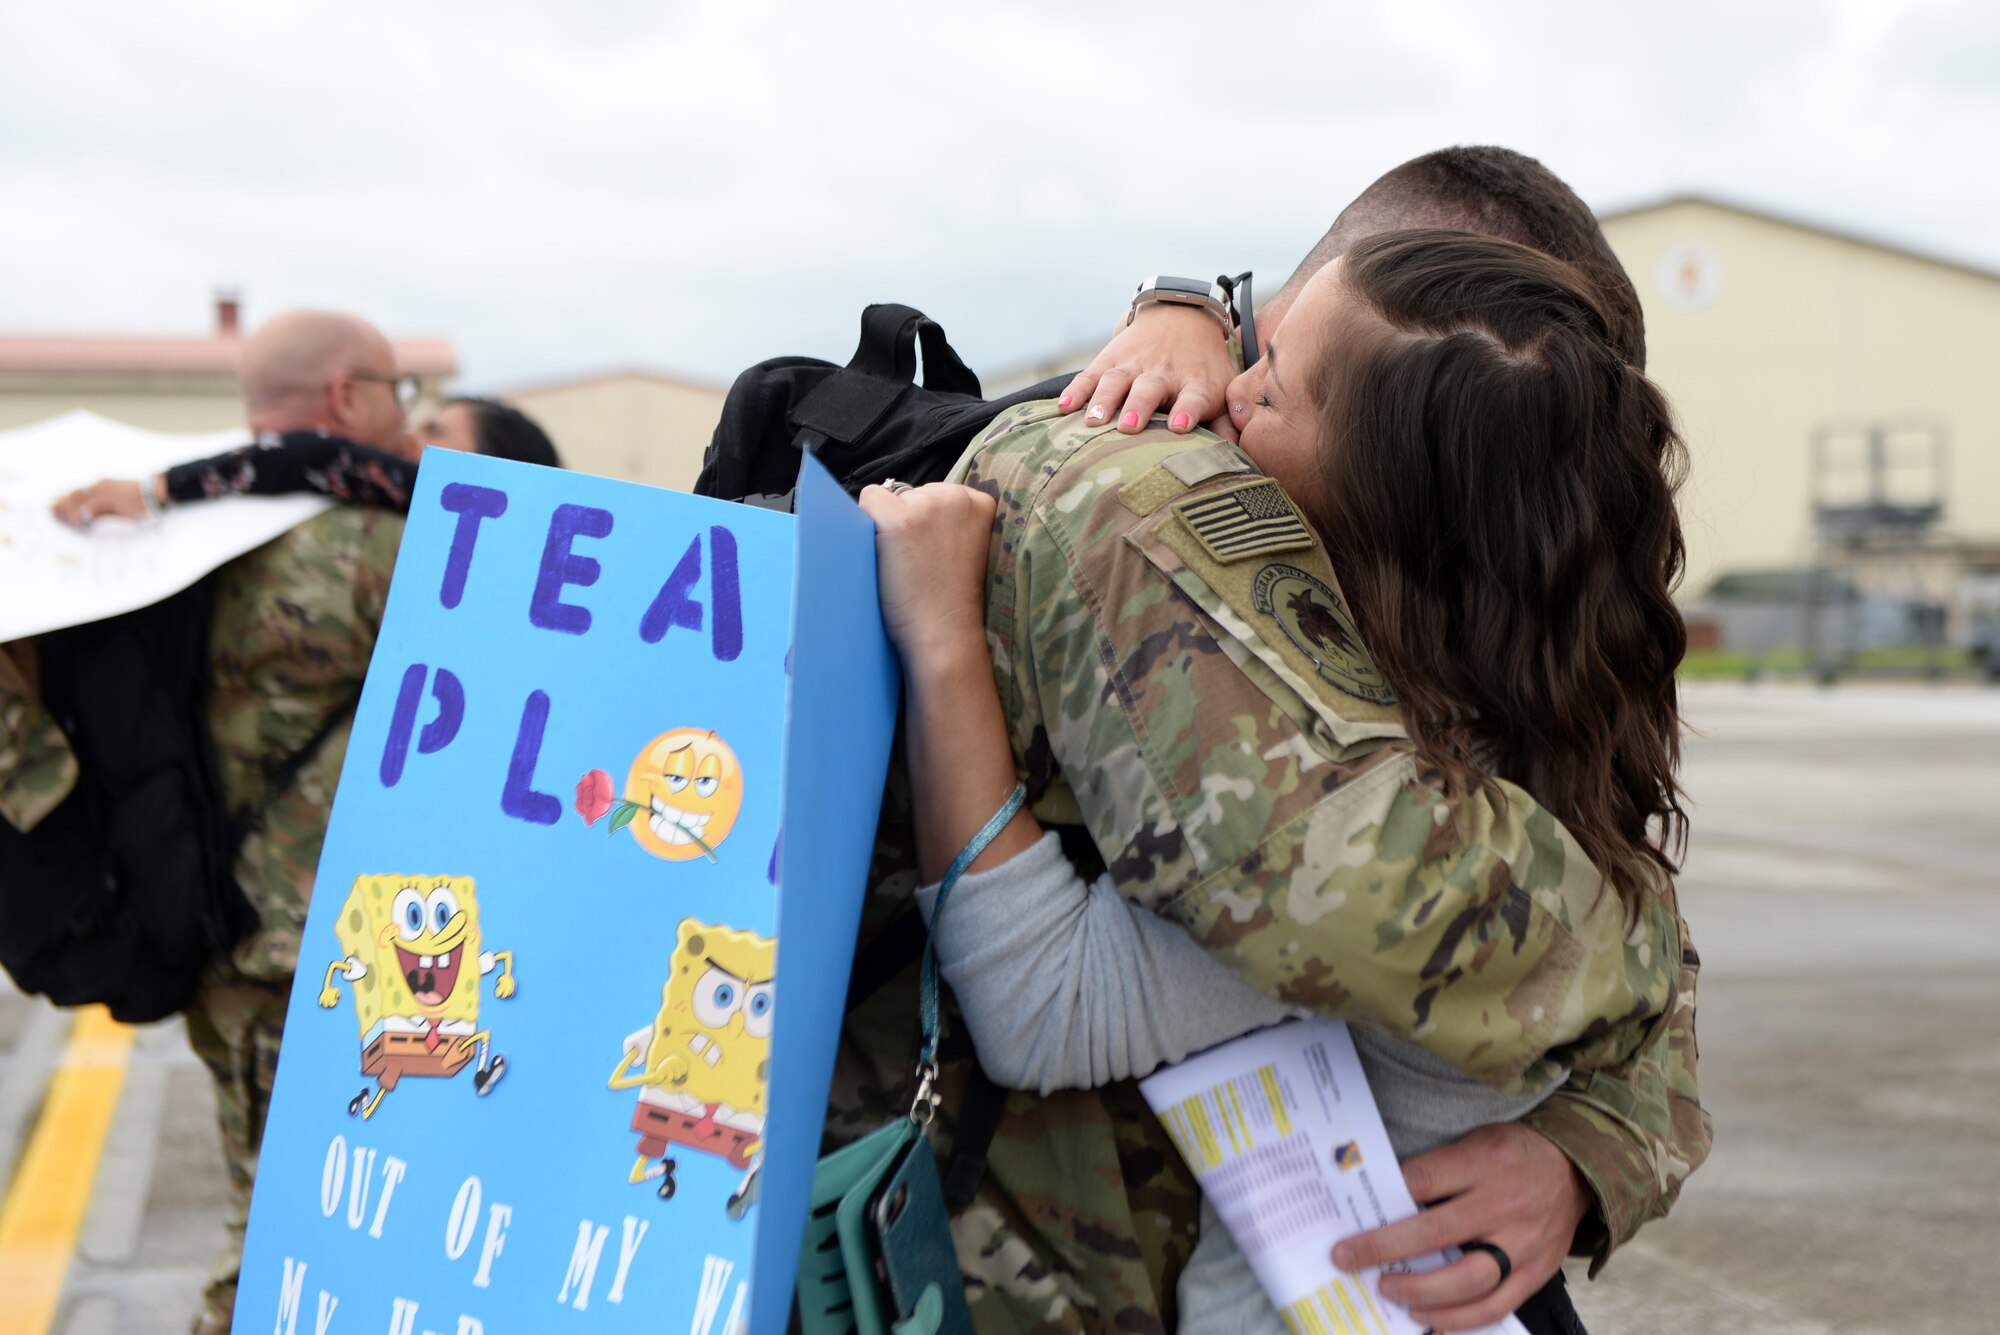 A 31st Fighter Wing Airman returns home from a deployment and embraces his spouse at Aviano Air Base, Italy, May 9, 2019. The Airman and Family Readiness Center provided various support programs for families of deployed members, including monthly family dinners. (U.S. Air Force photo by Senior Airman Kevin Sommer Giron)